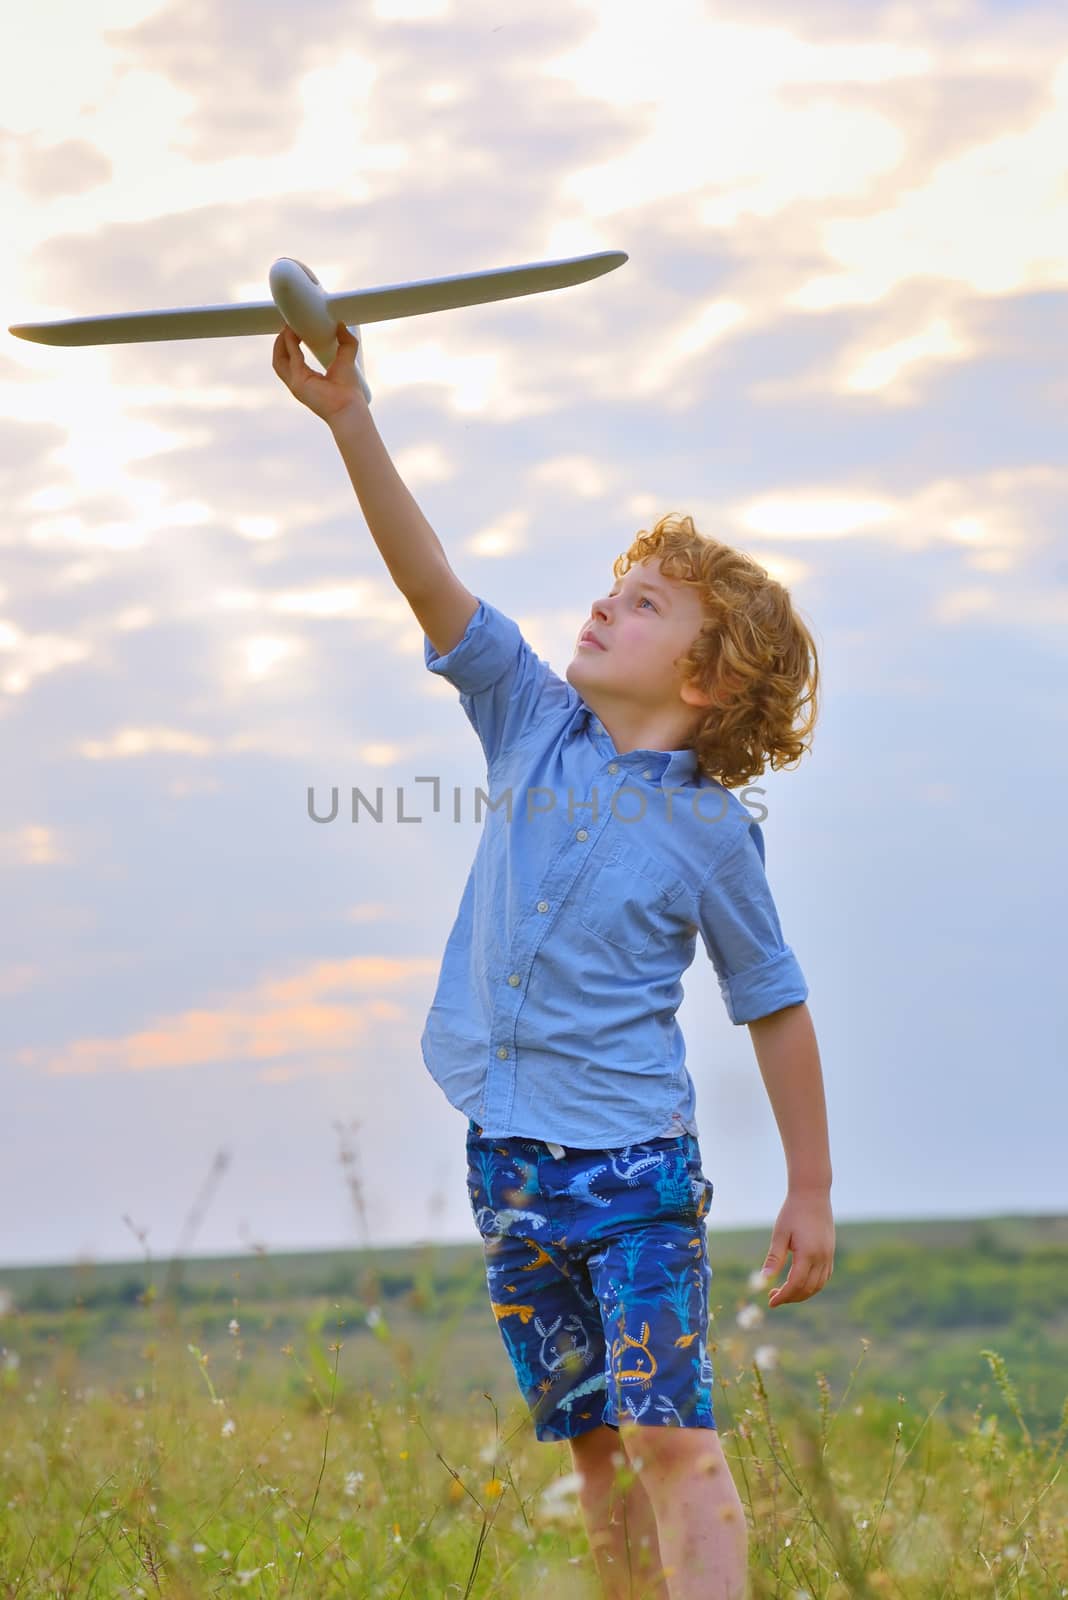 boy throwing airplane in the field